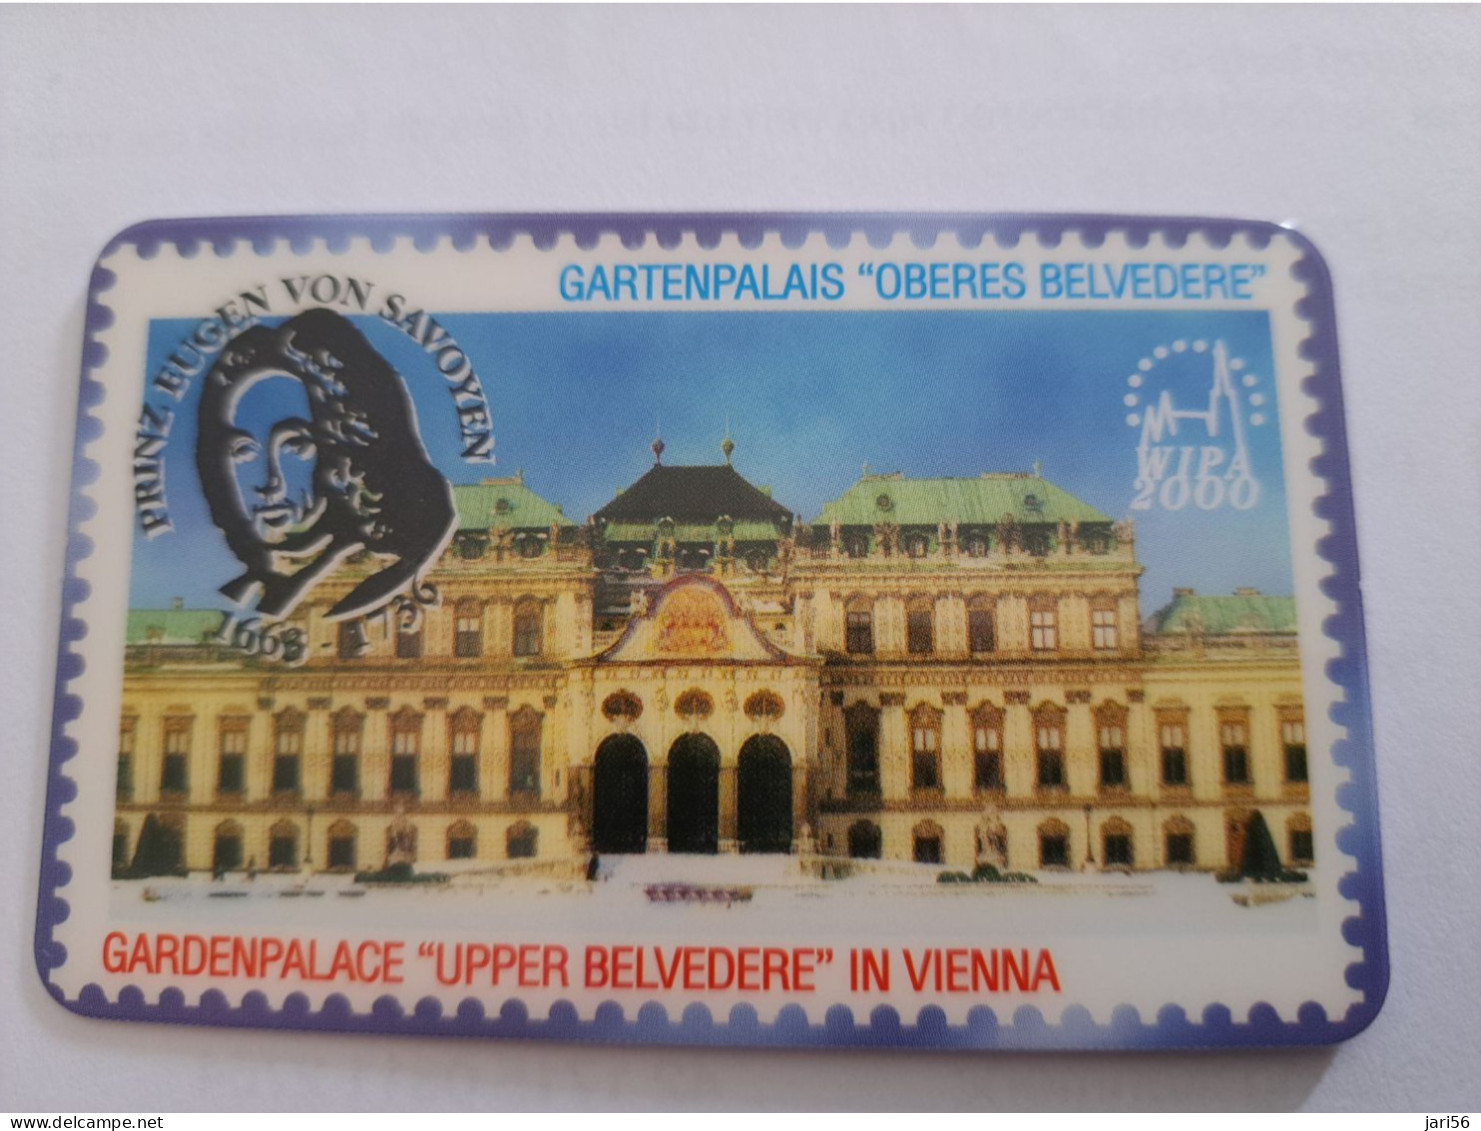 GREAT BRITAIN /20 UNITS / VIENNA/ GARTENPALAIS/ BELVEDERE / STAMPS ON CARD / (date 05/00) PREPAID CARD / MINT  **14312** - Collections